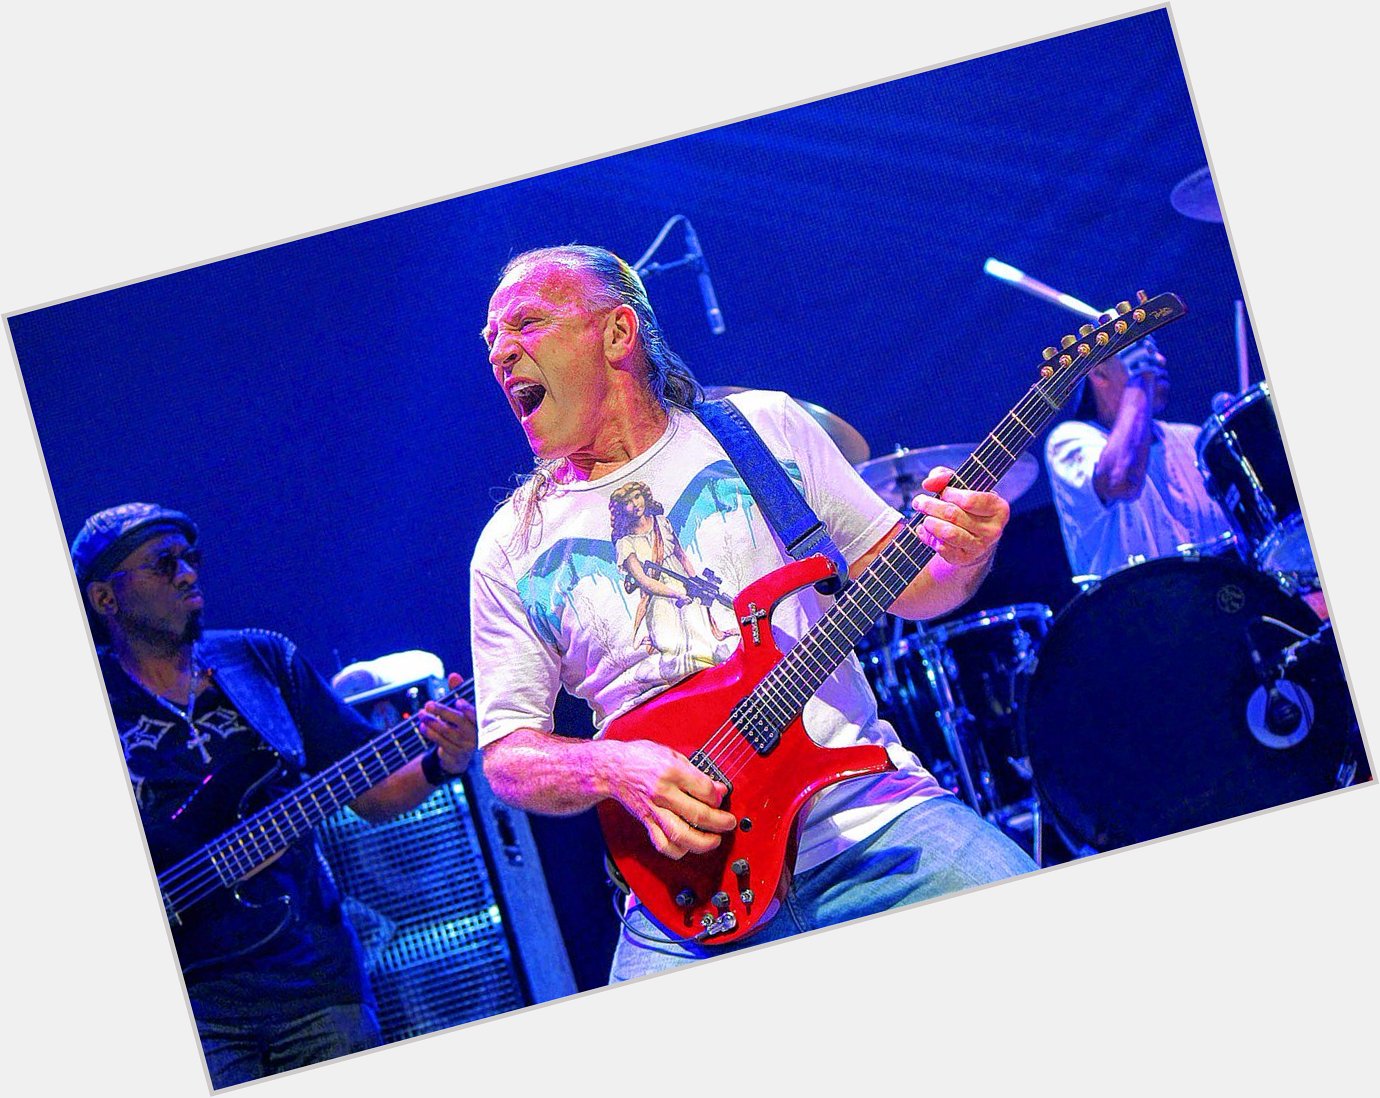 A Big BOSS Happy Birthday today to Mark Farner of Grand Funk Railroad from all of us at The Boss! 